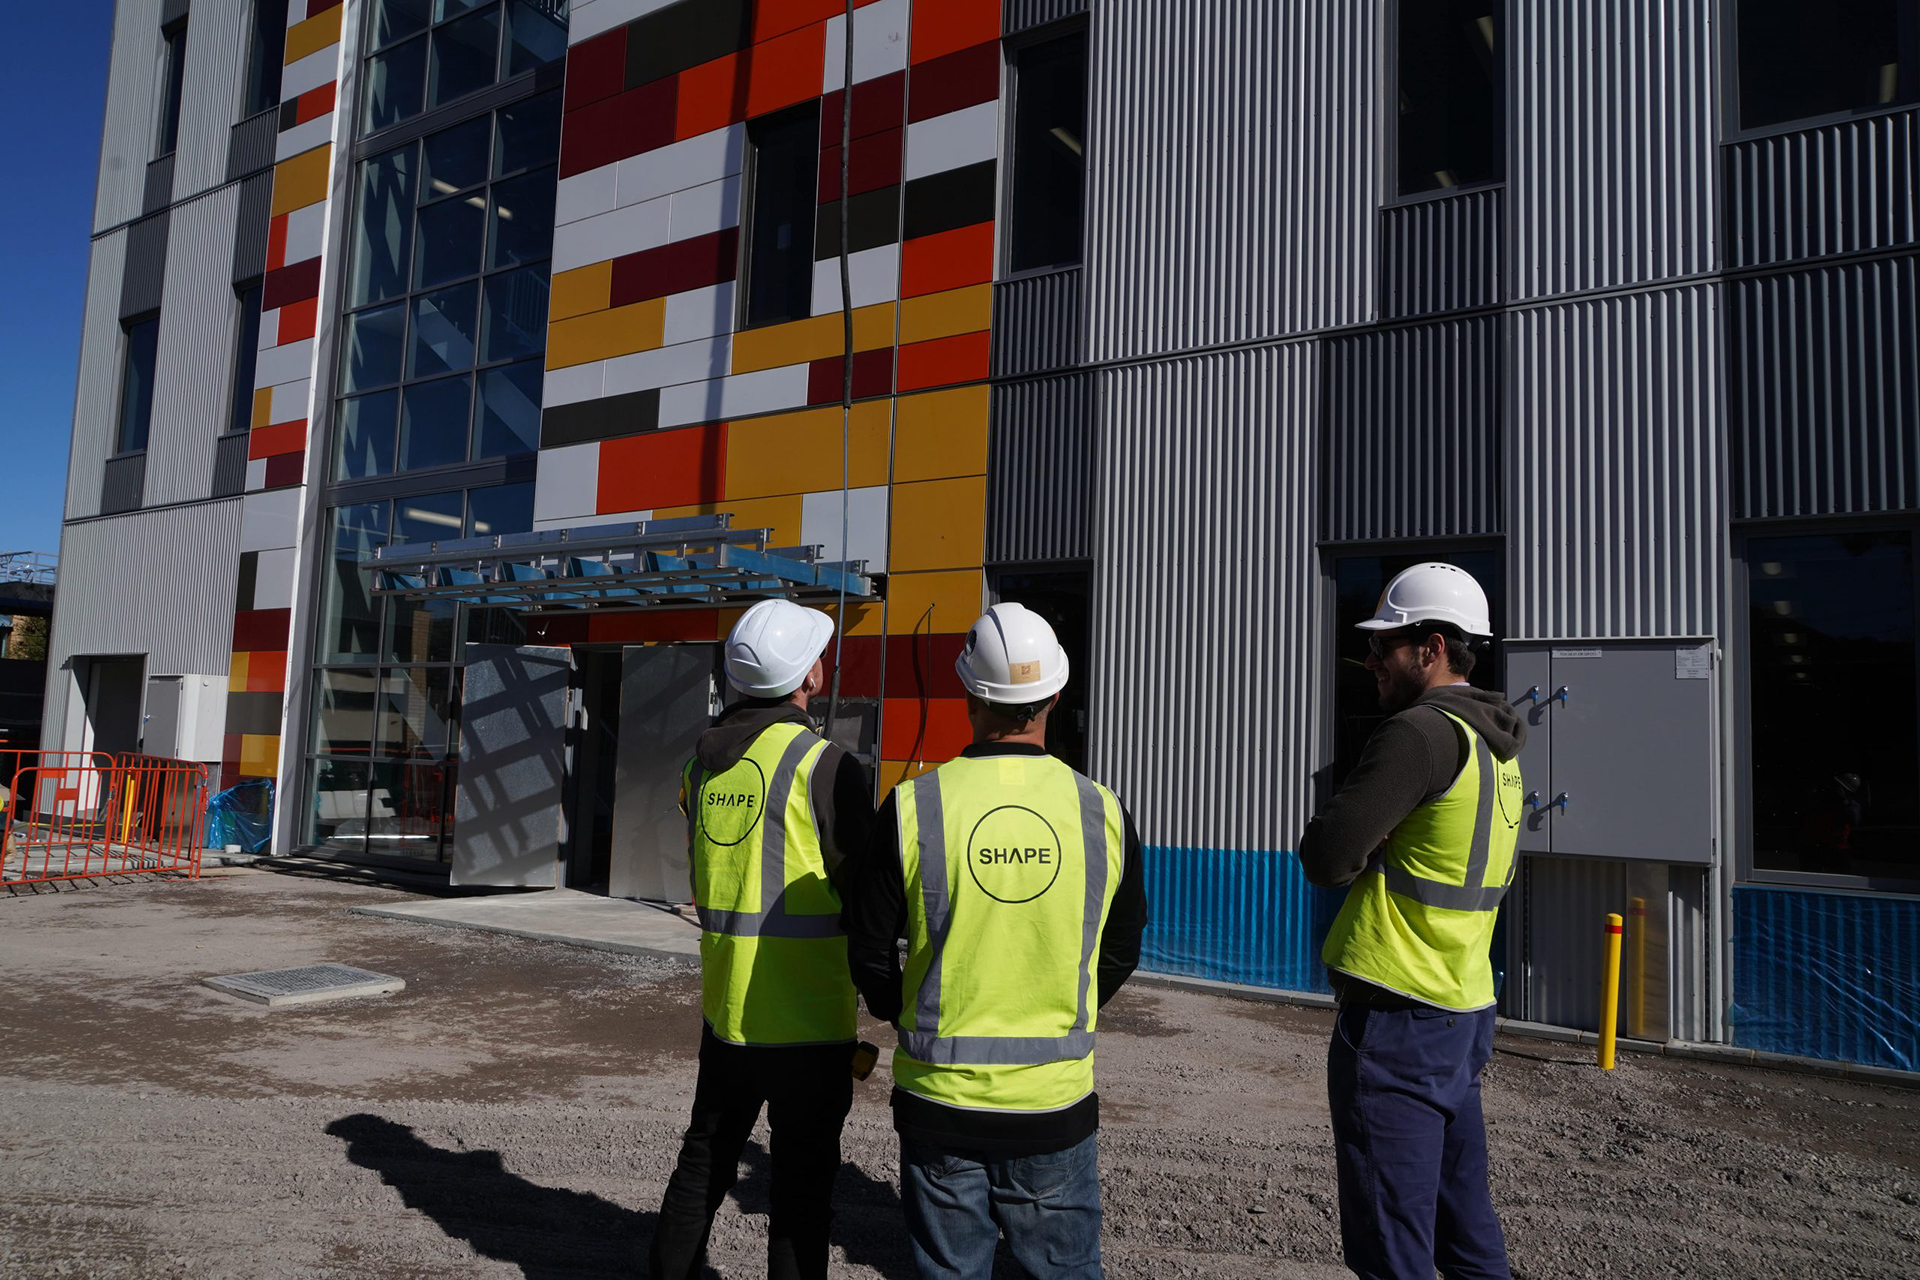 canberra-hospital-expansion-project-building-8-modular-act-canberra-shape-australia_2